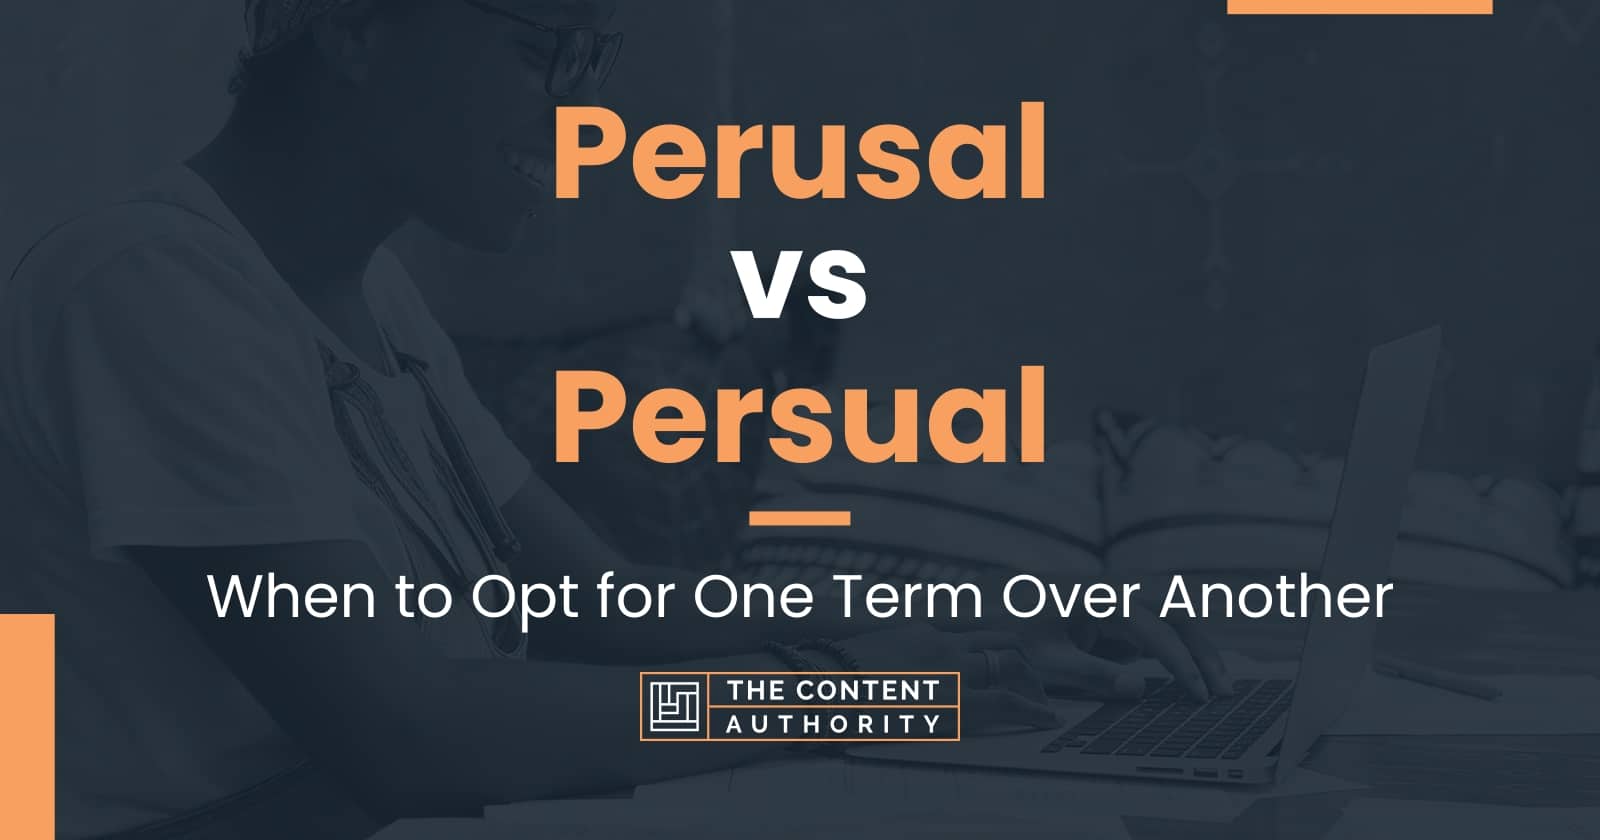 Perusal vs Persual When to Opt for One Term Over Another